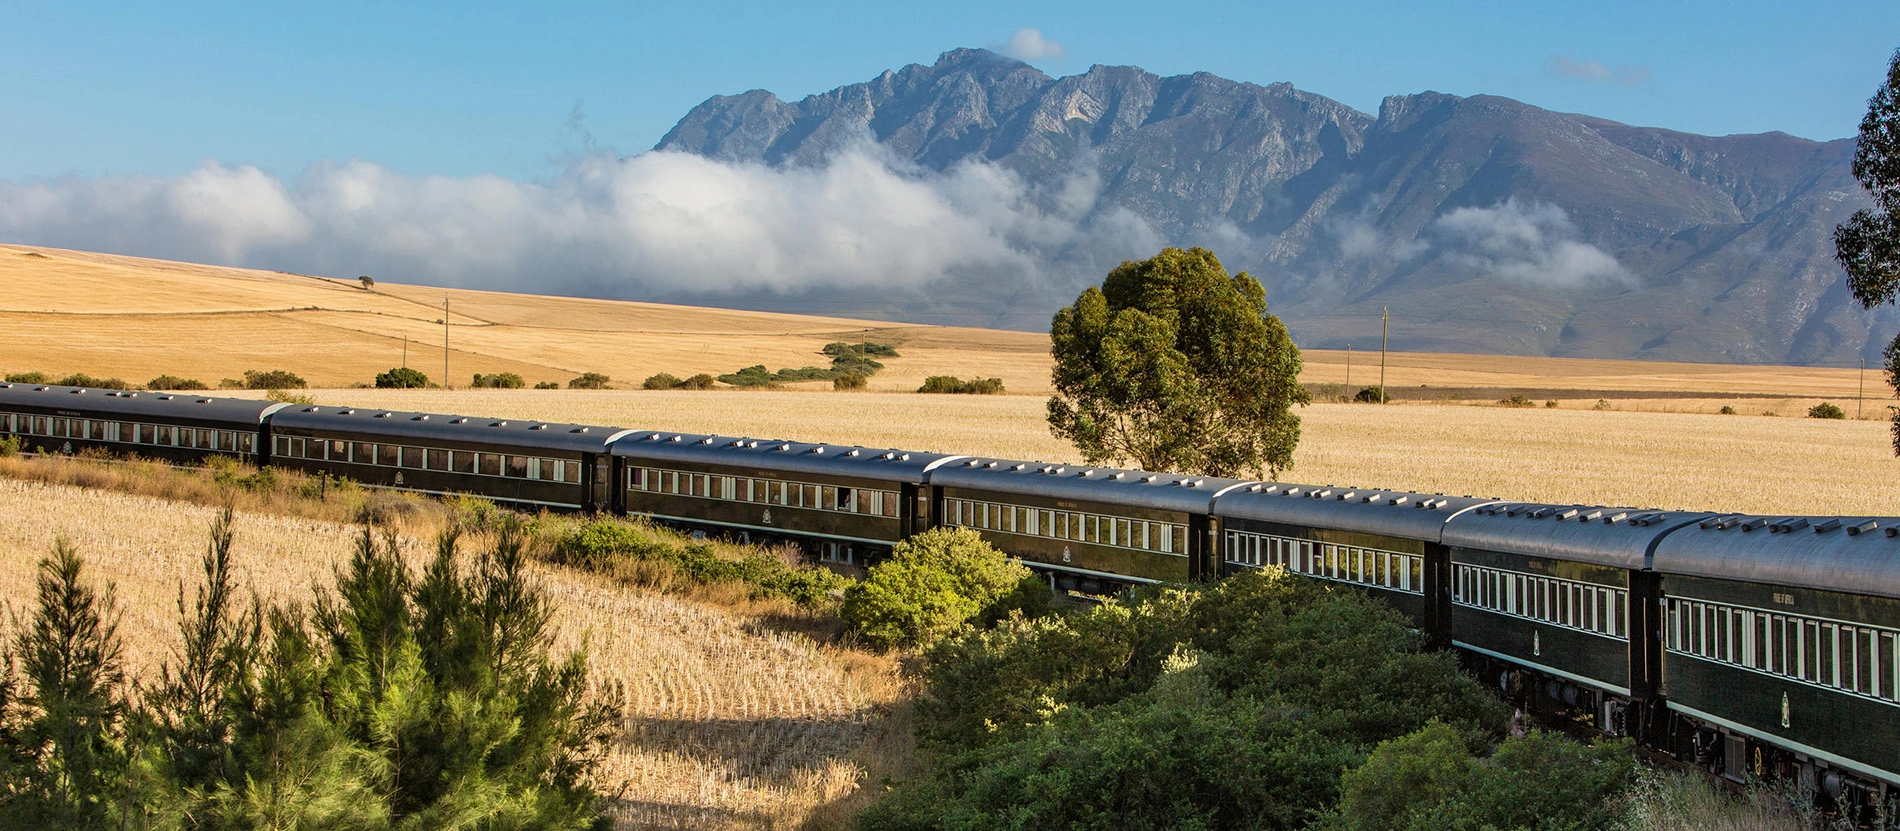 Sydafrika_Rovos rail_The train making its way to Cape Town on the African Collage journey_banner_1900x831